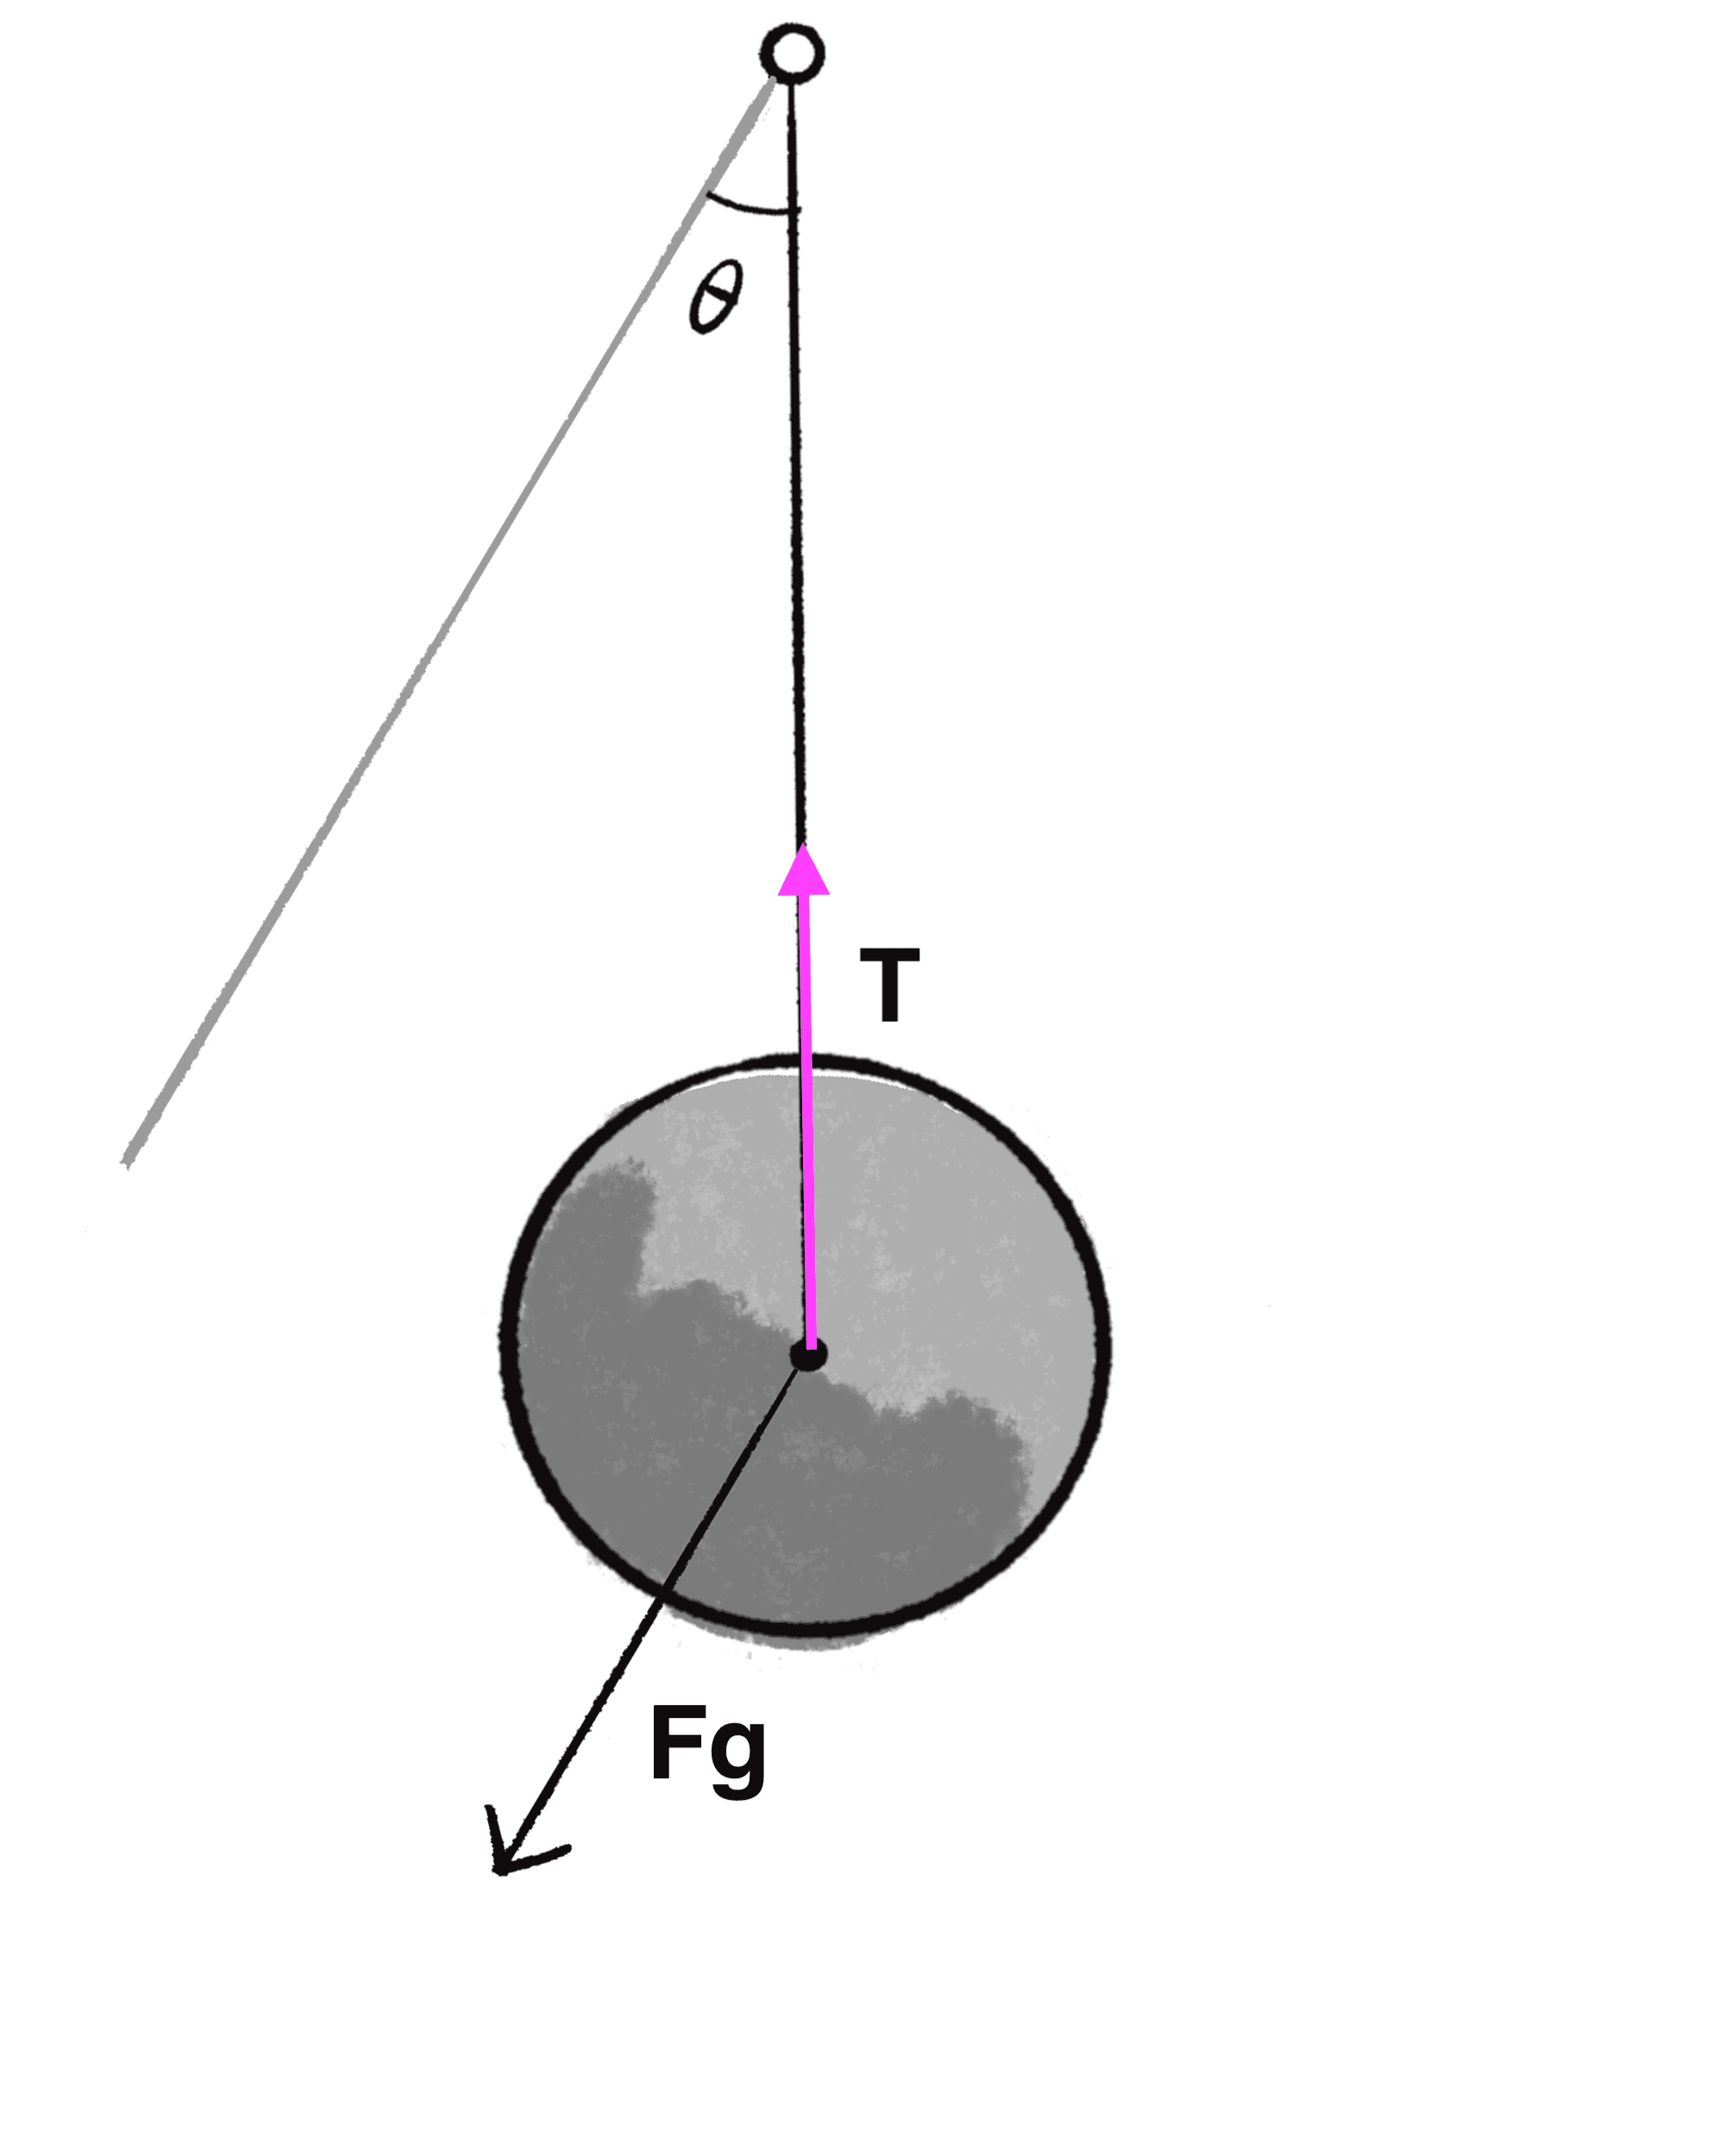 Figure 3.17: On the left, the pendulum is drawn rotated so that the arm is the y-axis. The right shows F_g zoomed in and divided into components F_{gx} and F_{gy}.